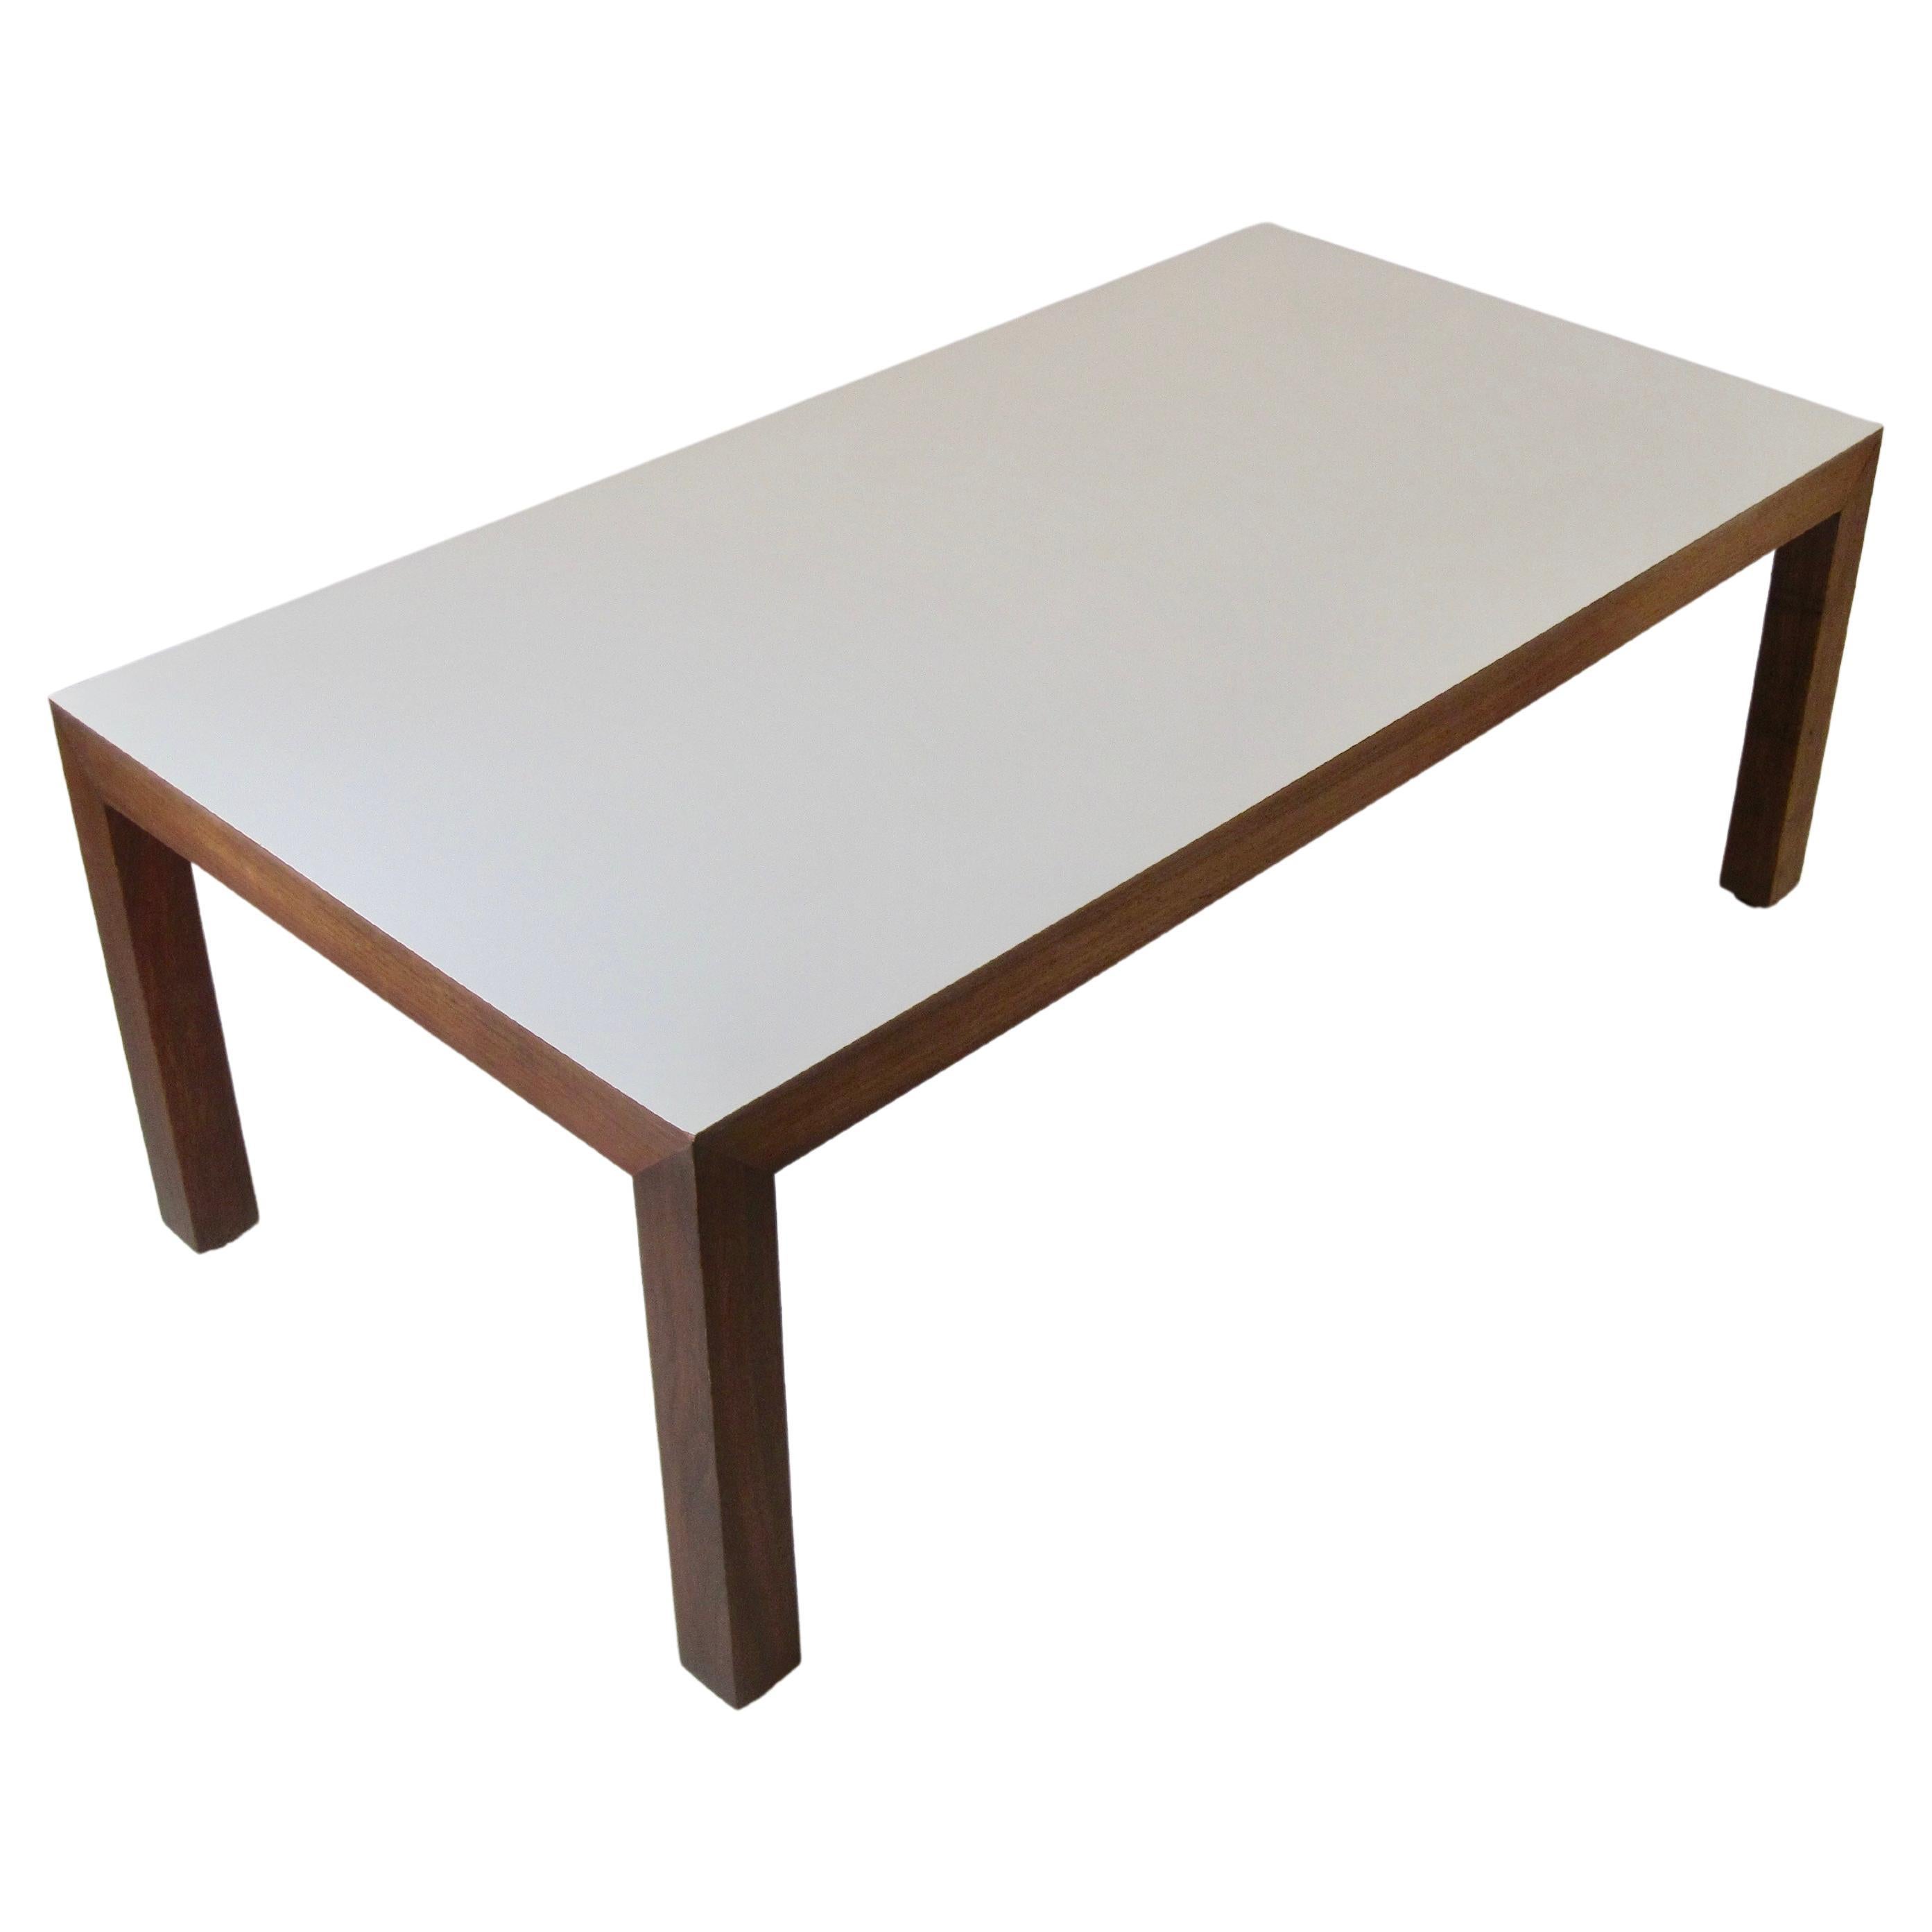 1960s Rectangular Wood Coffee Table with White Formica Laminate Top For Sale